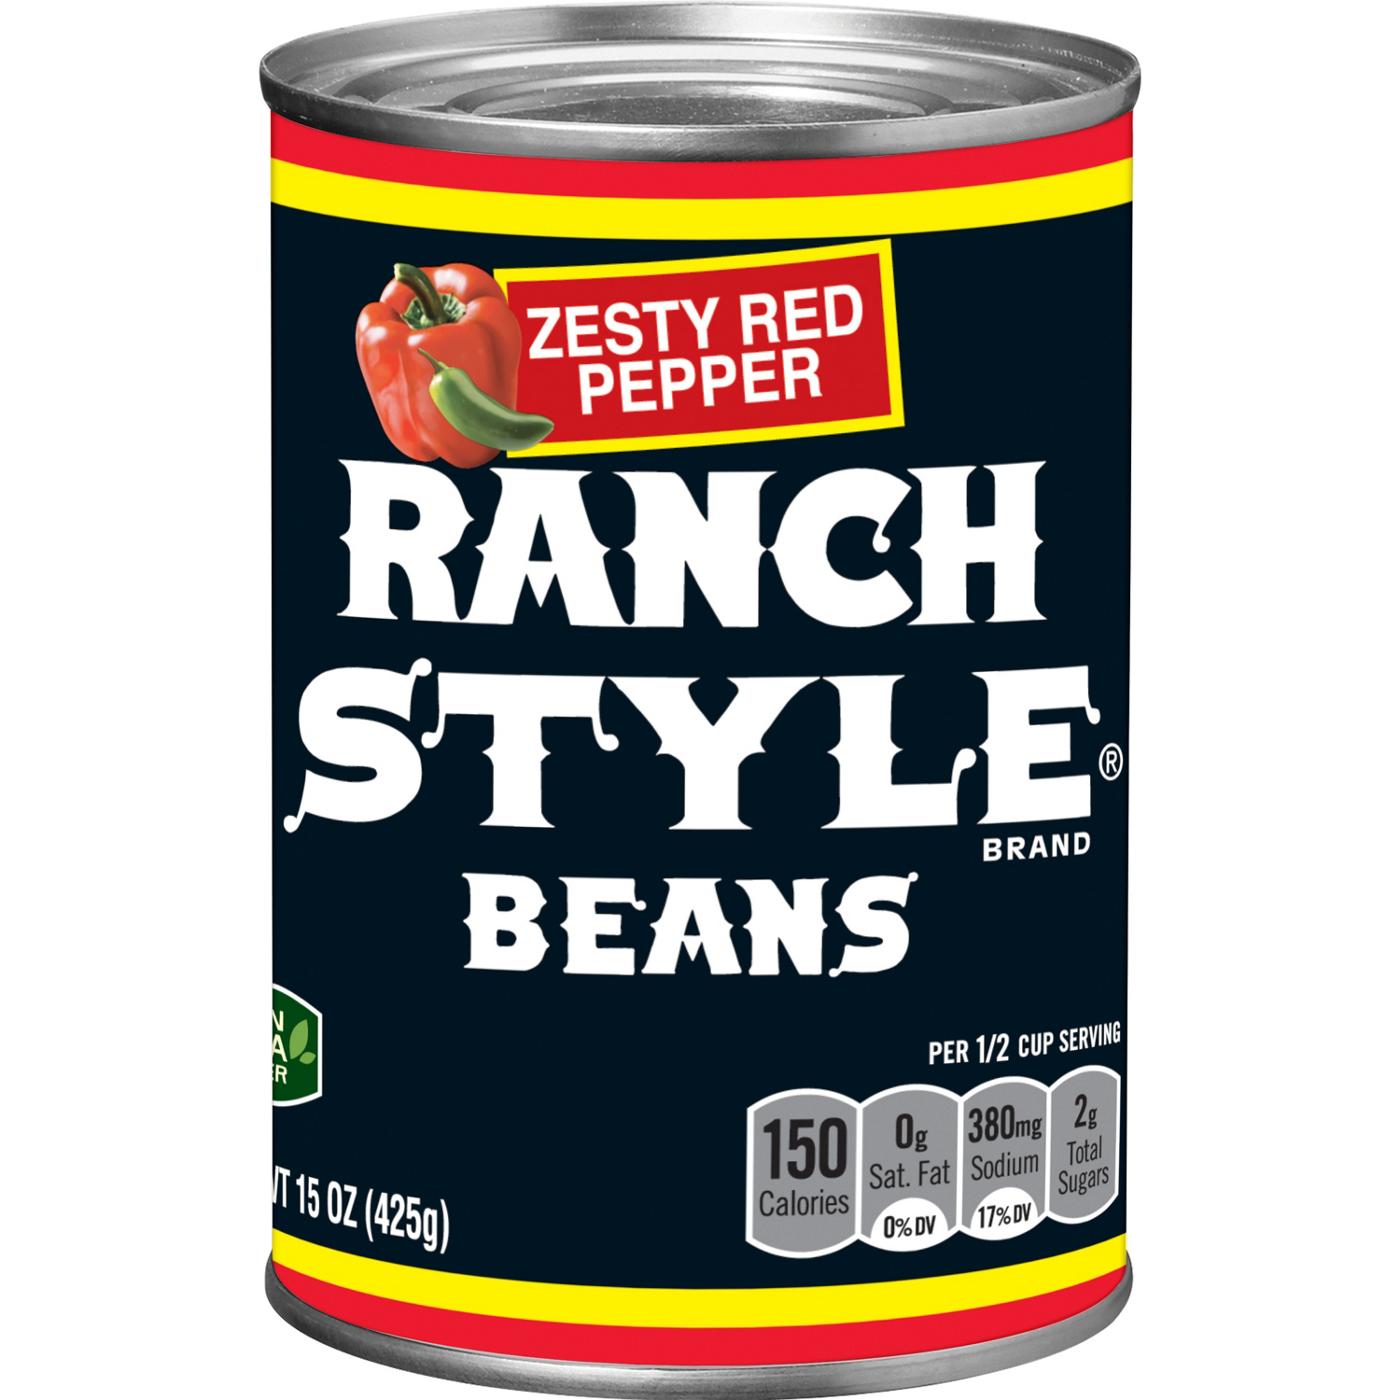 Ranch Style Beans Beans With Zesty Red Pepper Canned Beans; image 1 of 6